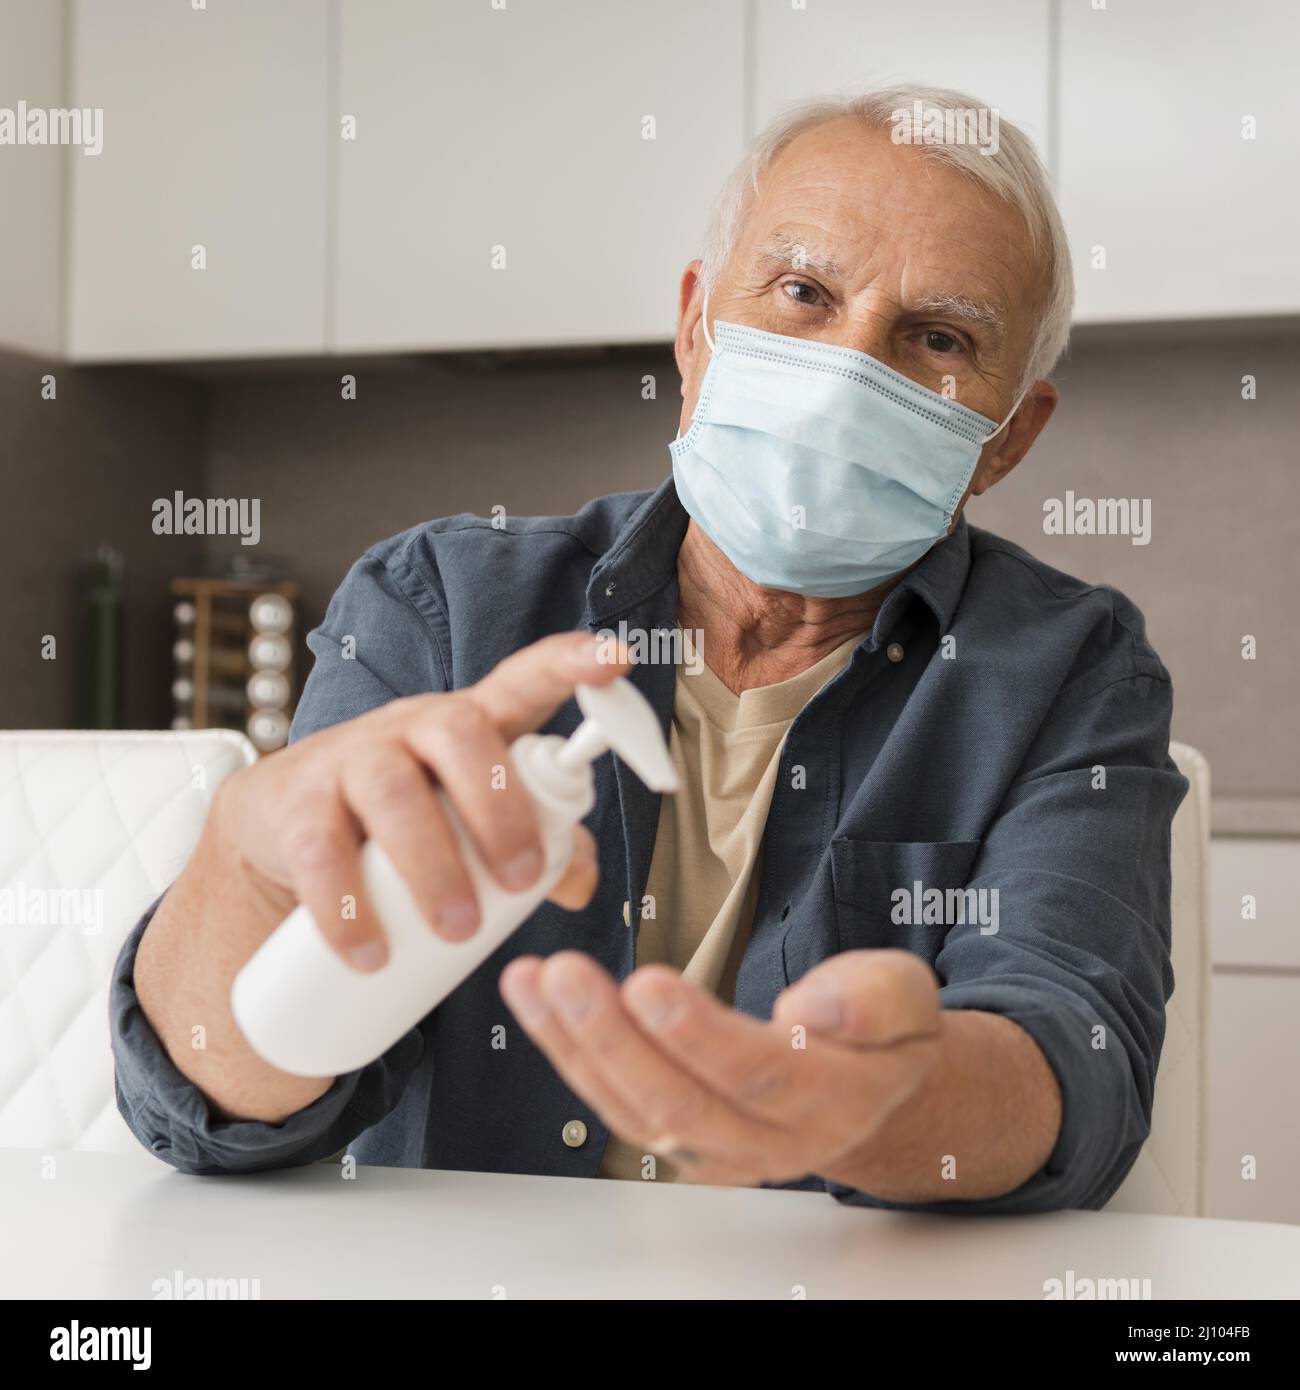 Front view man with mask disinfectant Stock Photo